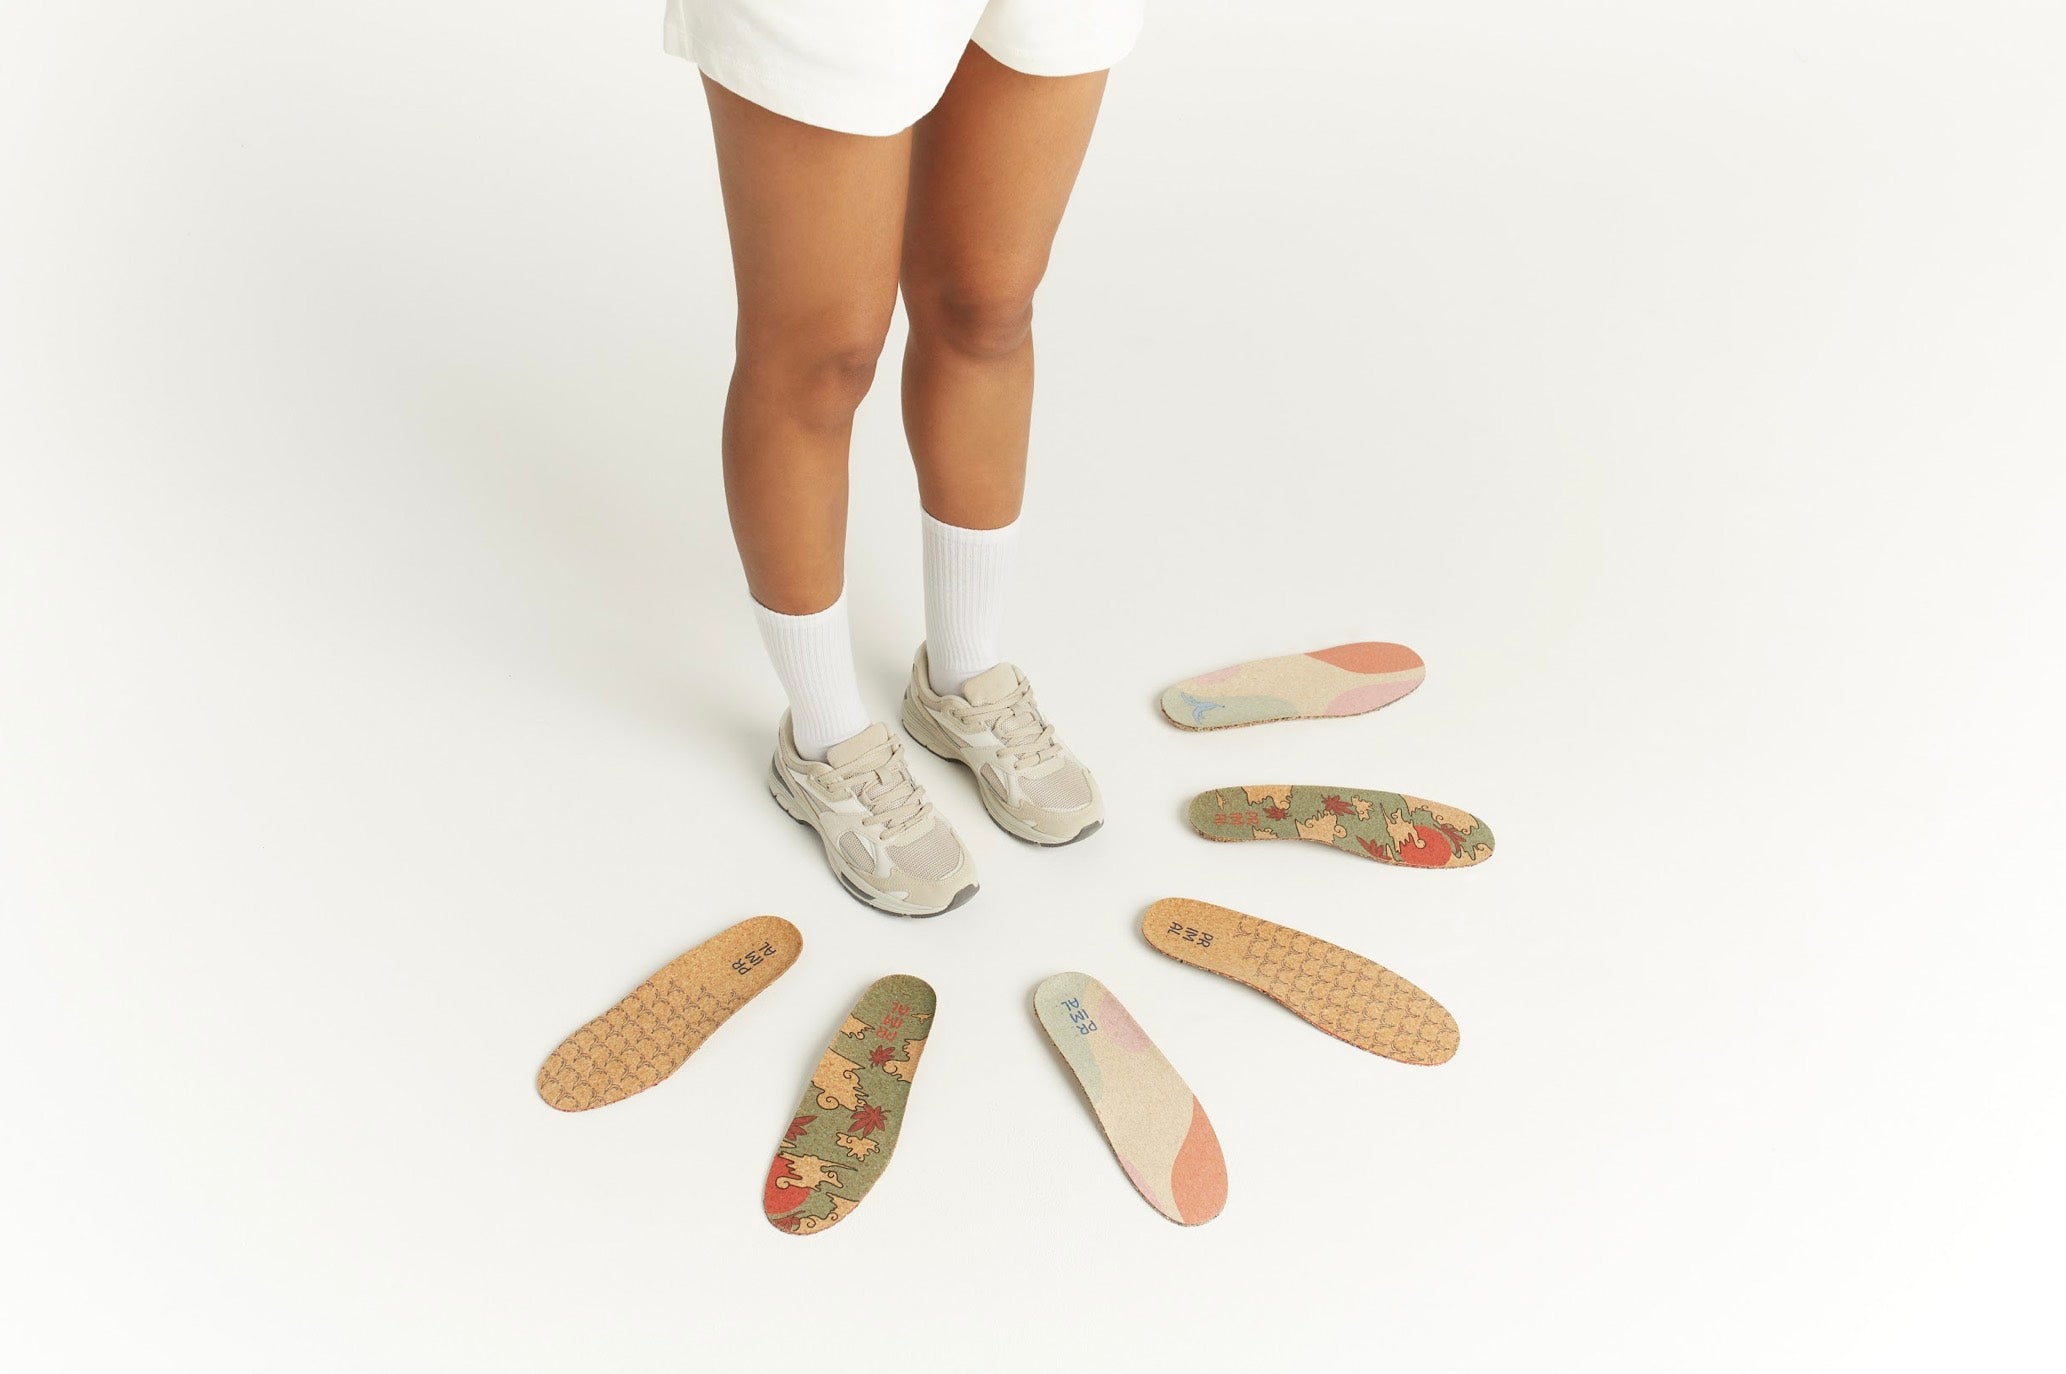 Sustainable cork insoles